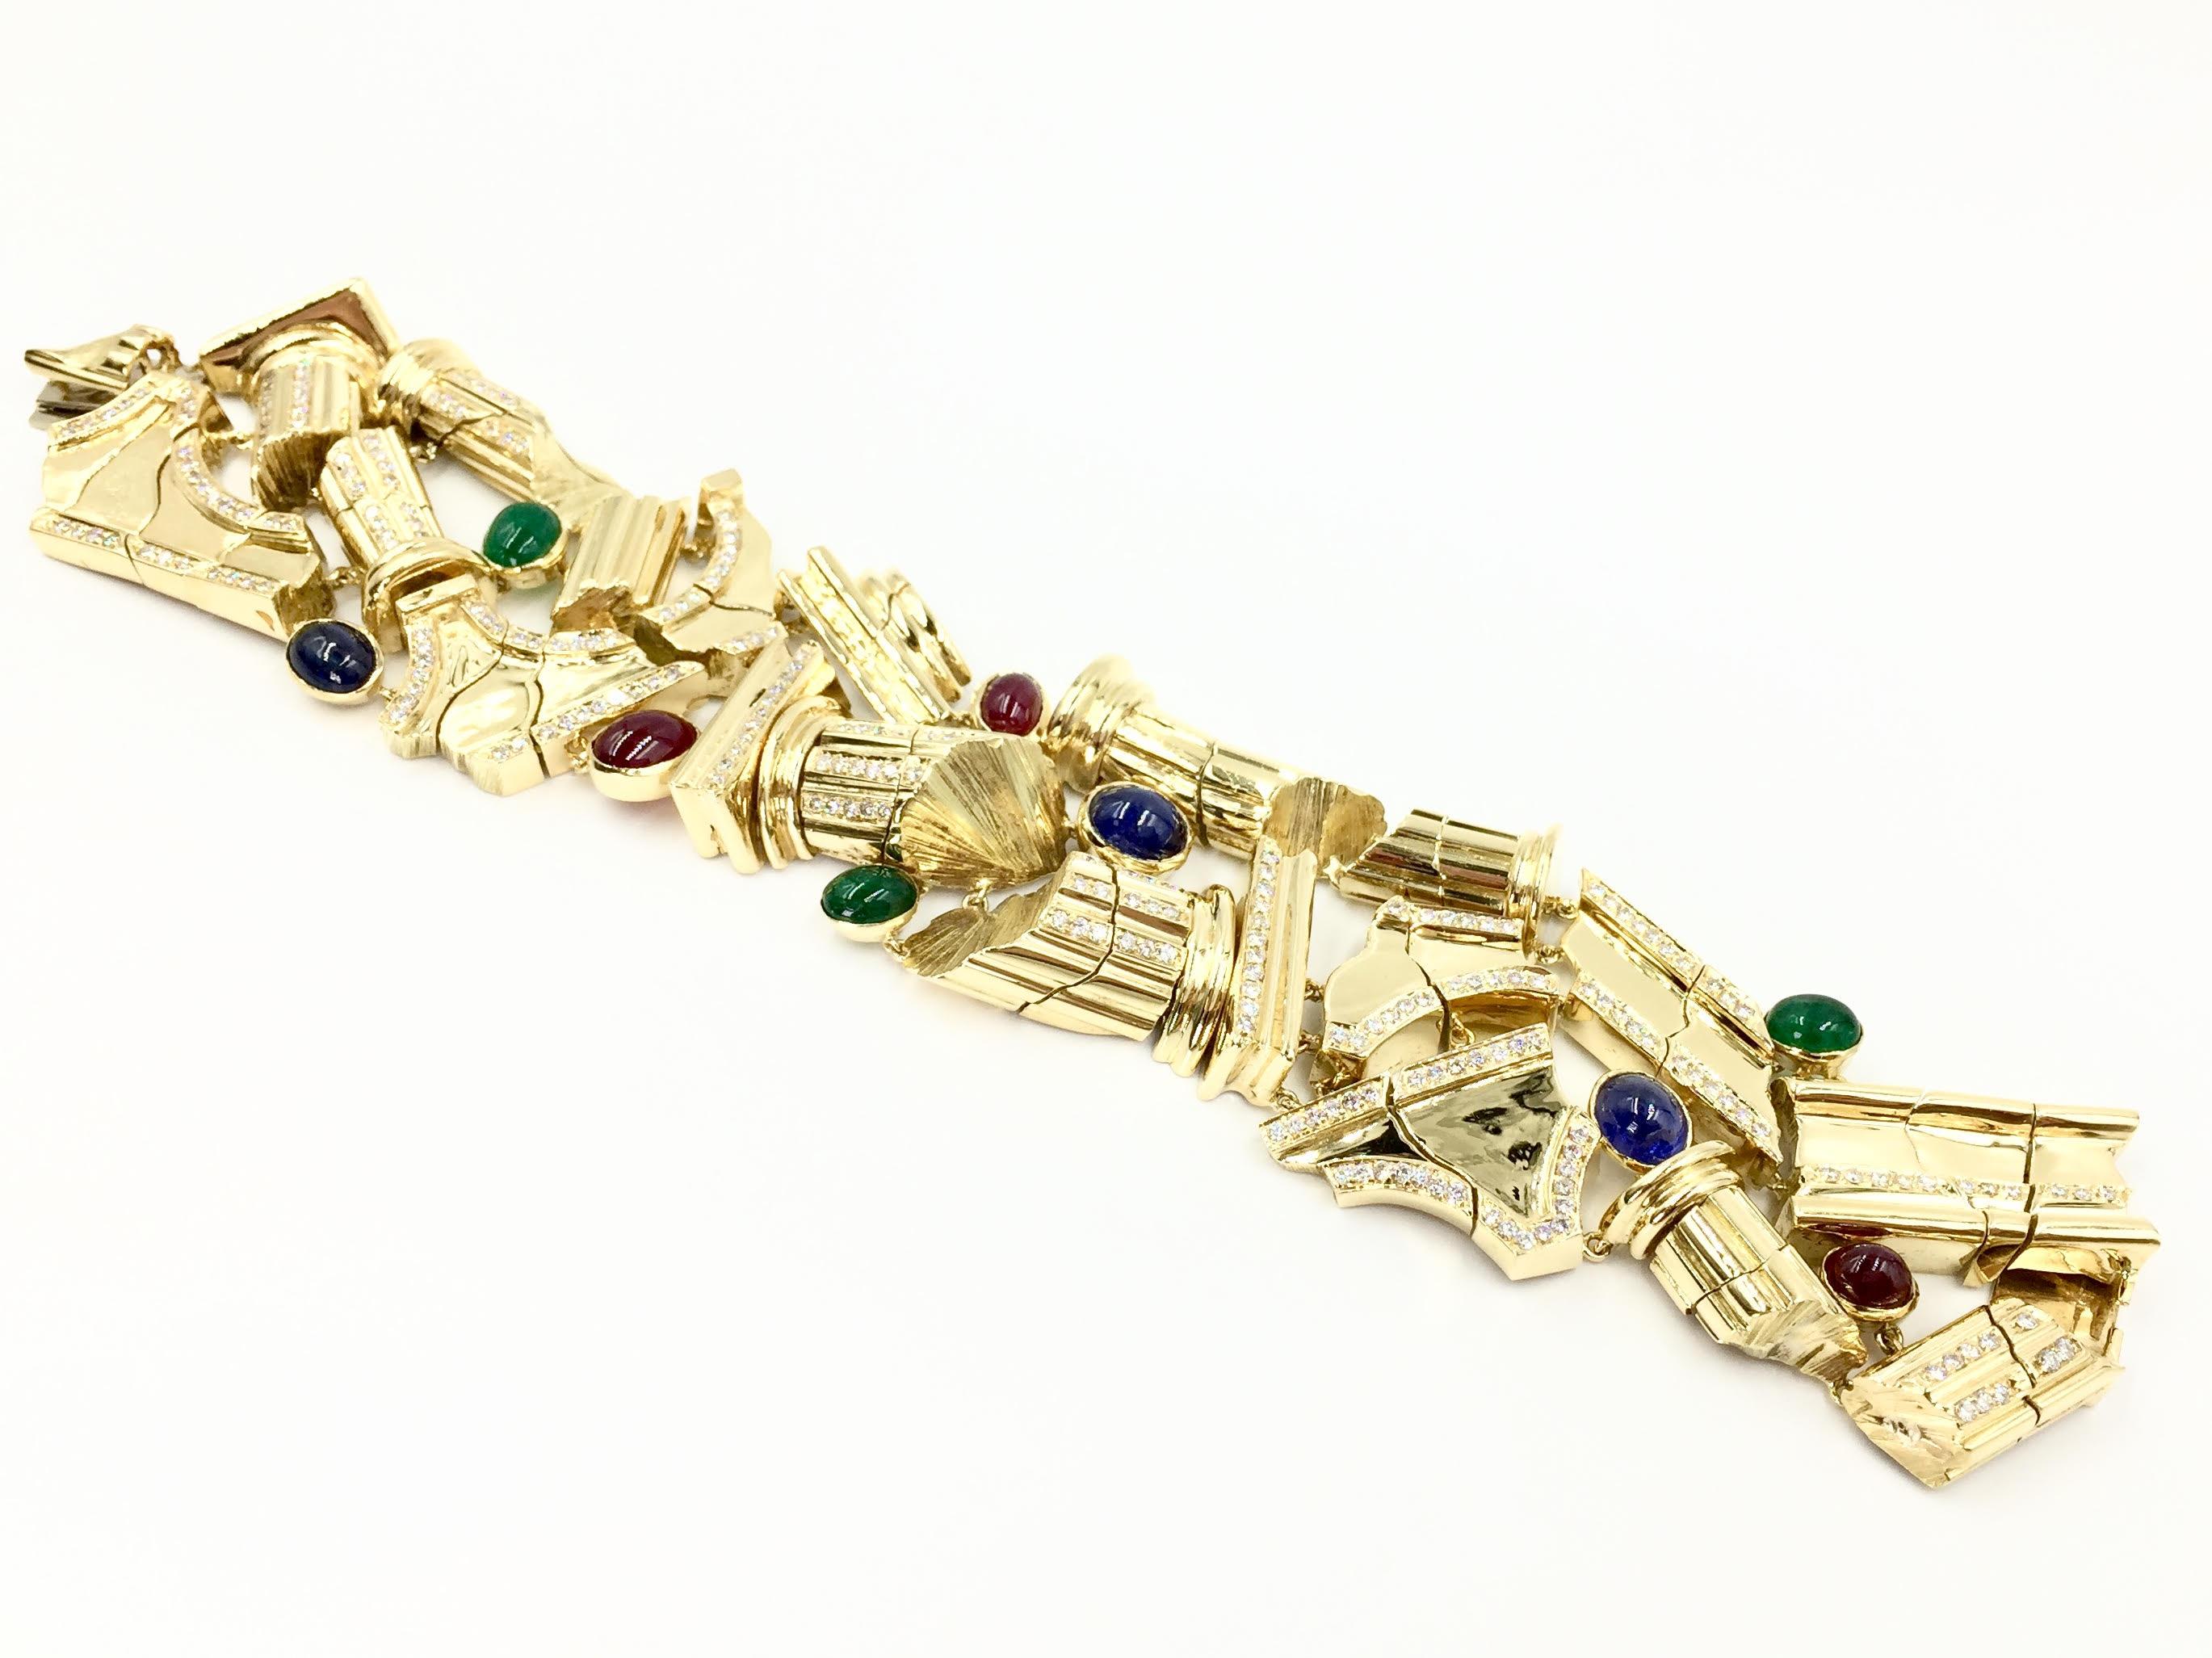 A truly unique find. This heavy and substantial 18 karat yellow gold Roman design link design bracelet features high quality and expertly polished cabochon blue sapphires, rubies and emeralds. 3.43 carats of bright white diamonds add extra sparkle